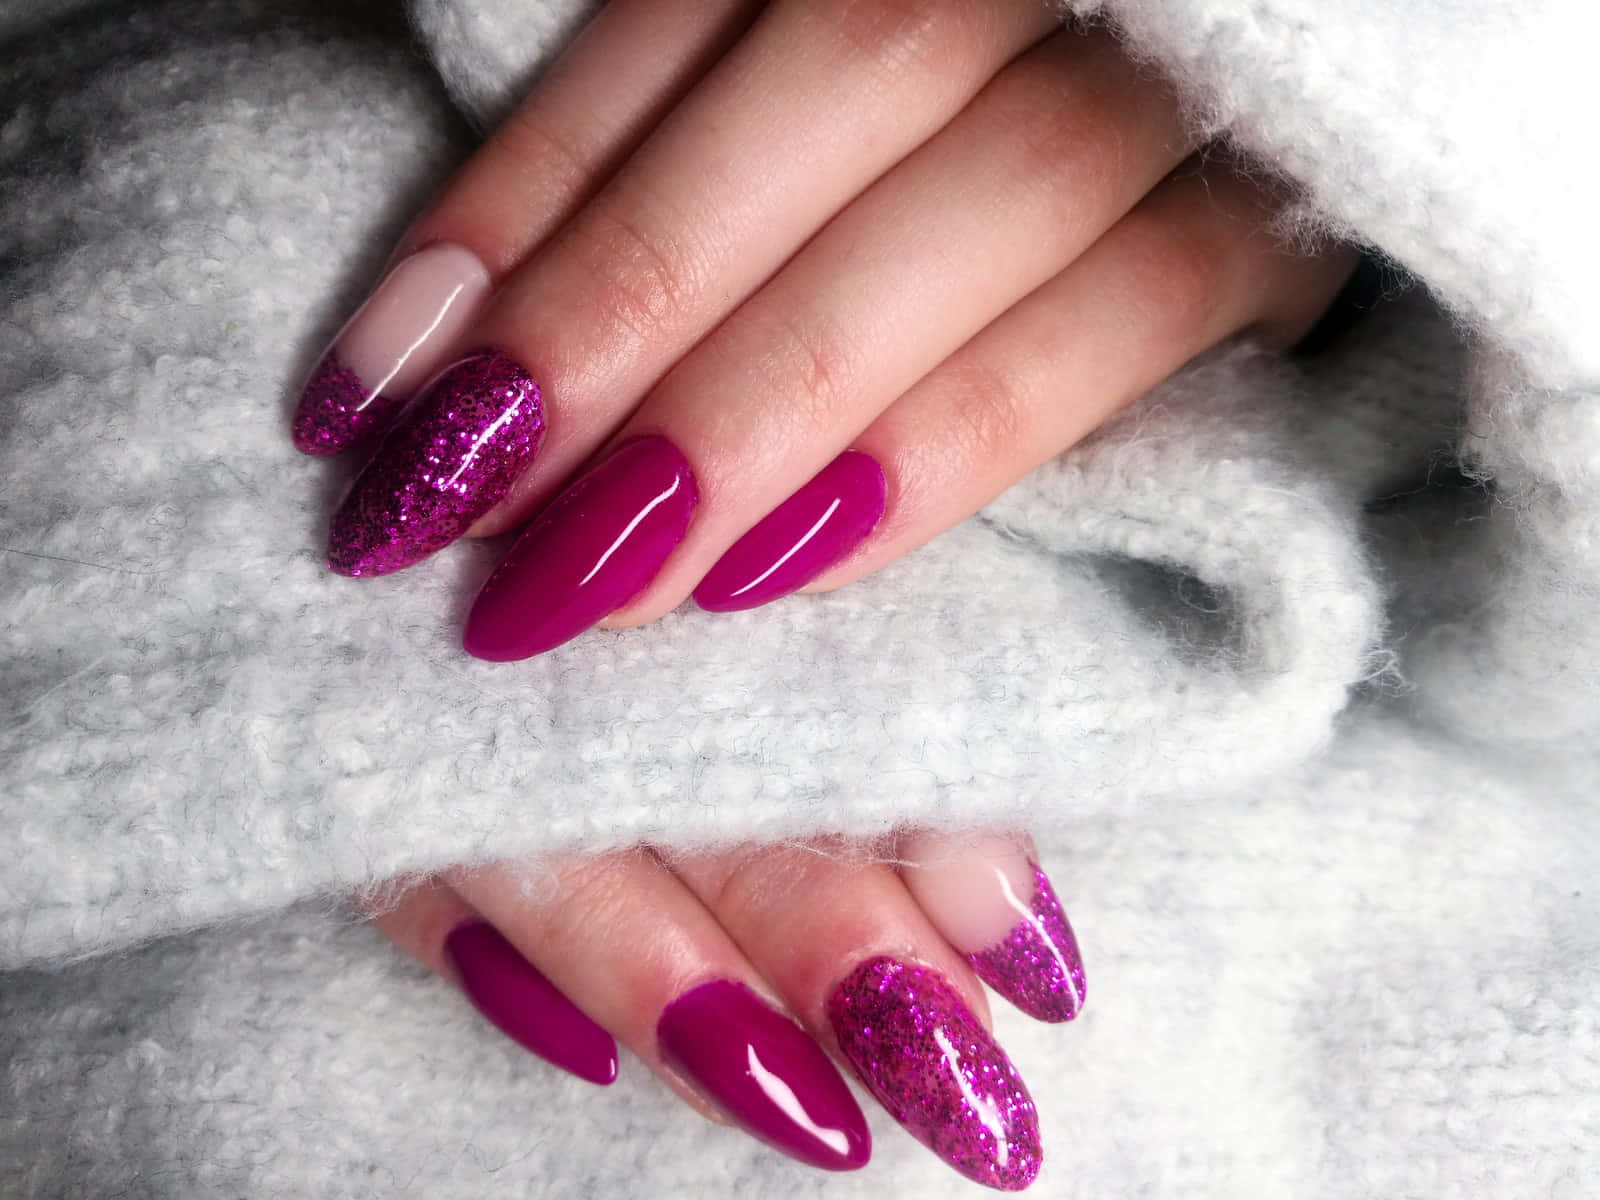 Get ready for something beautiful with these stunning nails